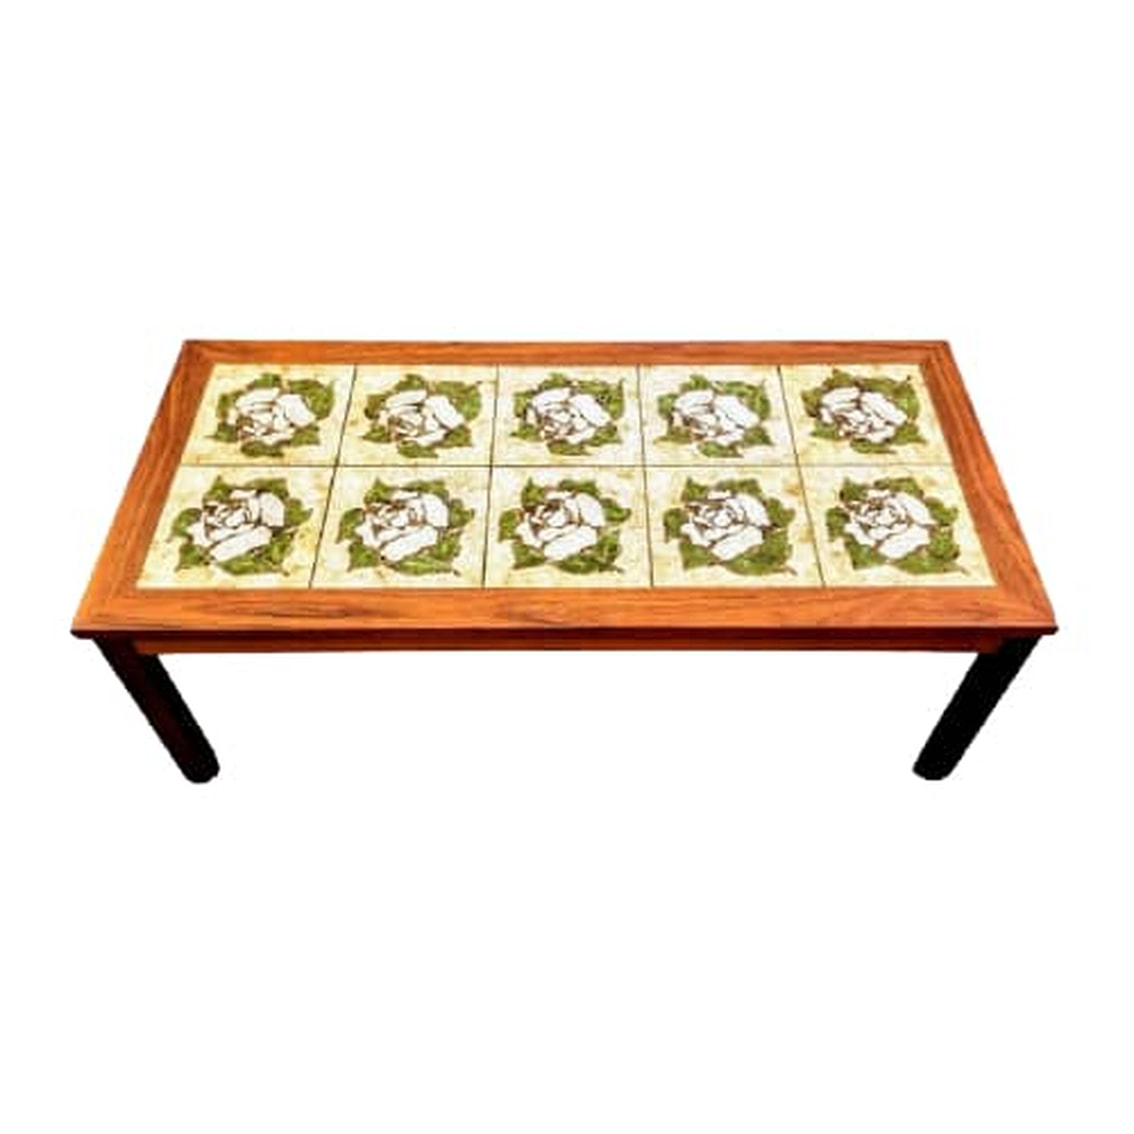 Vintage Danish Modern teak coffee table. Ceramic tiles inset into top feature white roses with green leaves against a mottled white and yellow background.